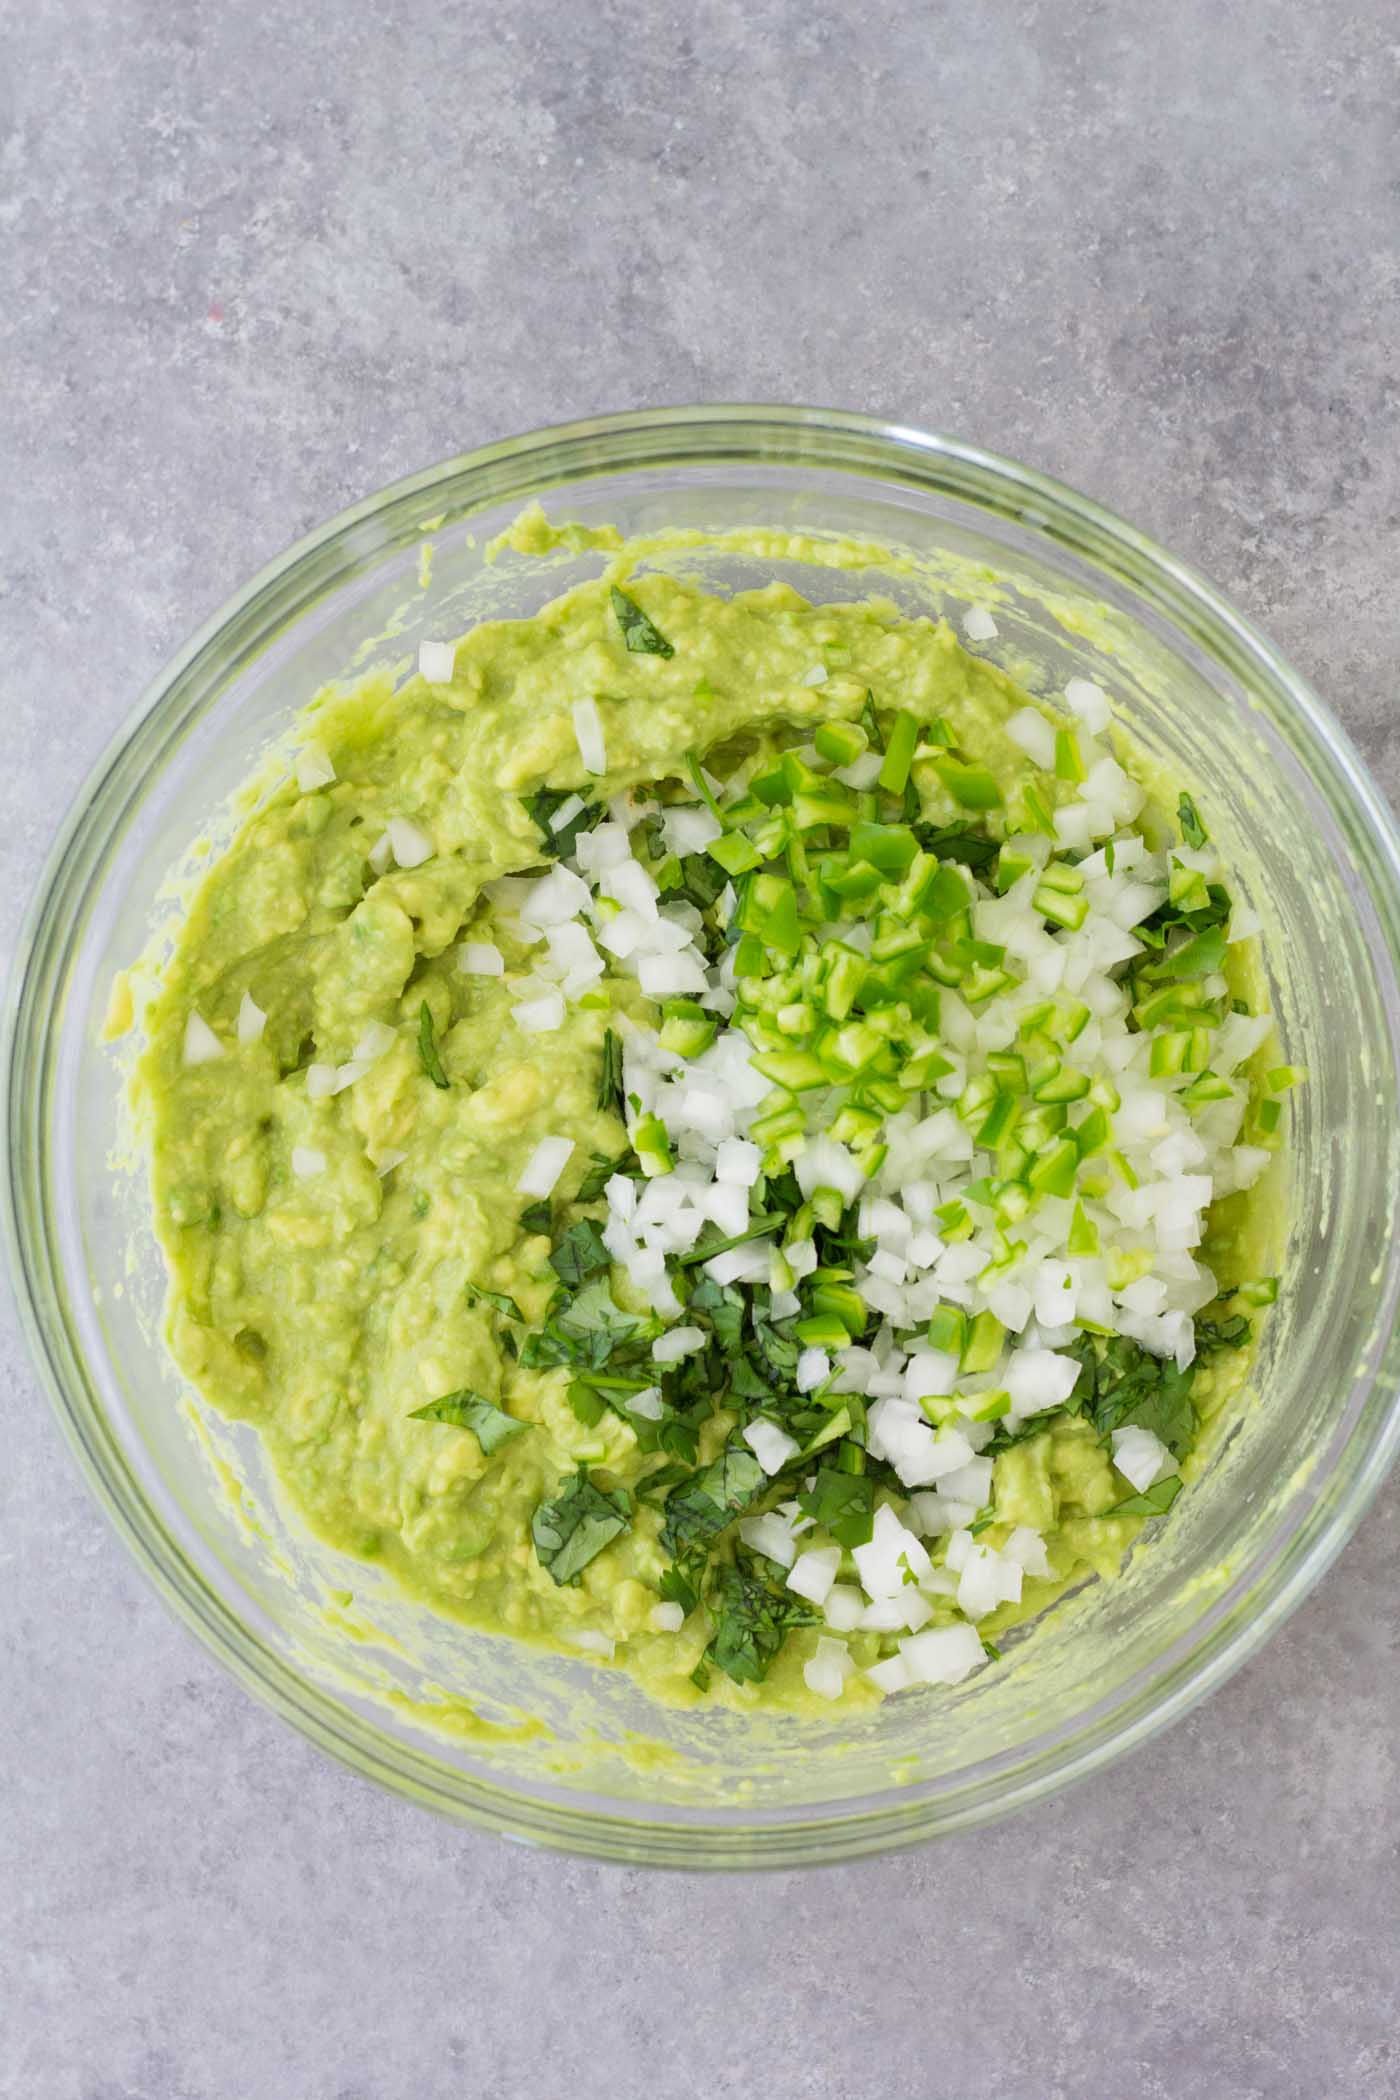 Guacamole ingredients in a mixing bowl.